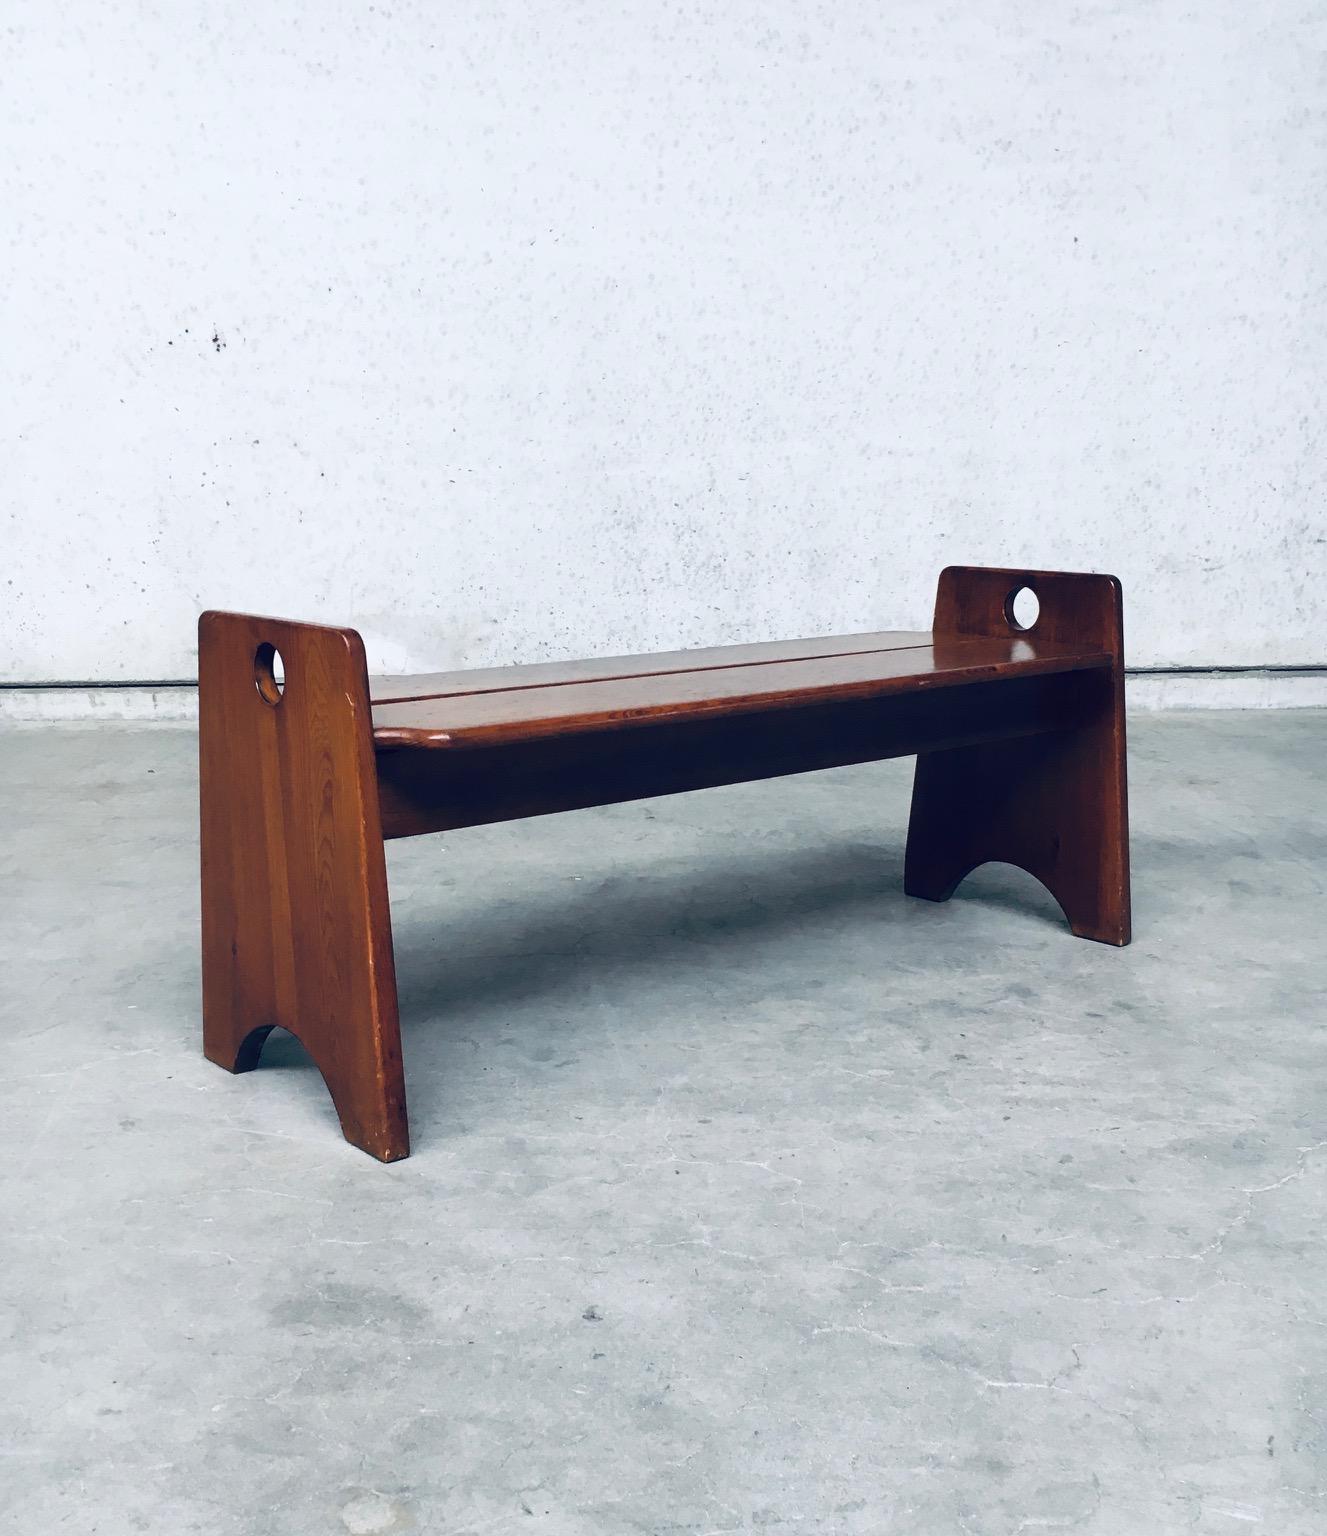 Vintage Mid-Century Modern Dutch design side bench, made in the Netherlands 1960's. Solid stained beech wood constructed bench. Very nice in design and finish. In very good, original condition, one small piece broken at one base (see pictures).